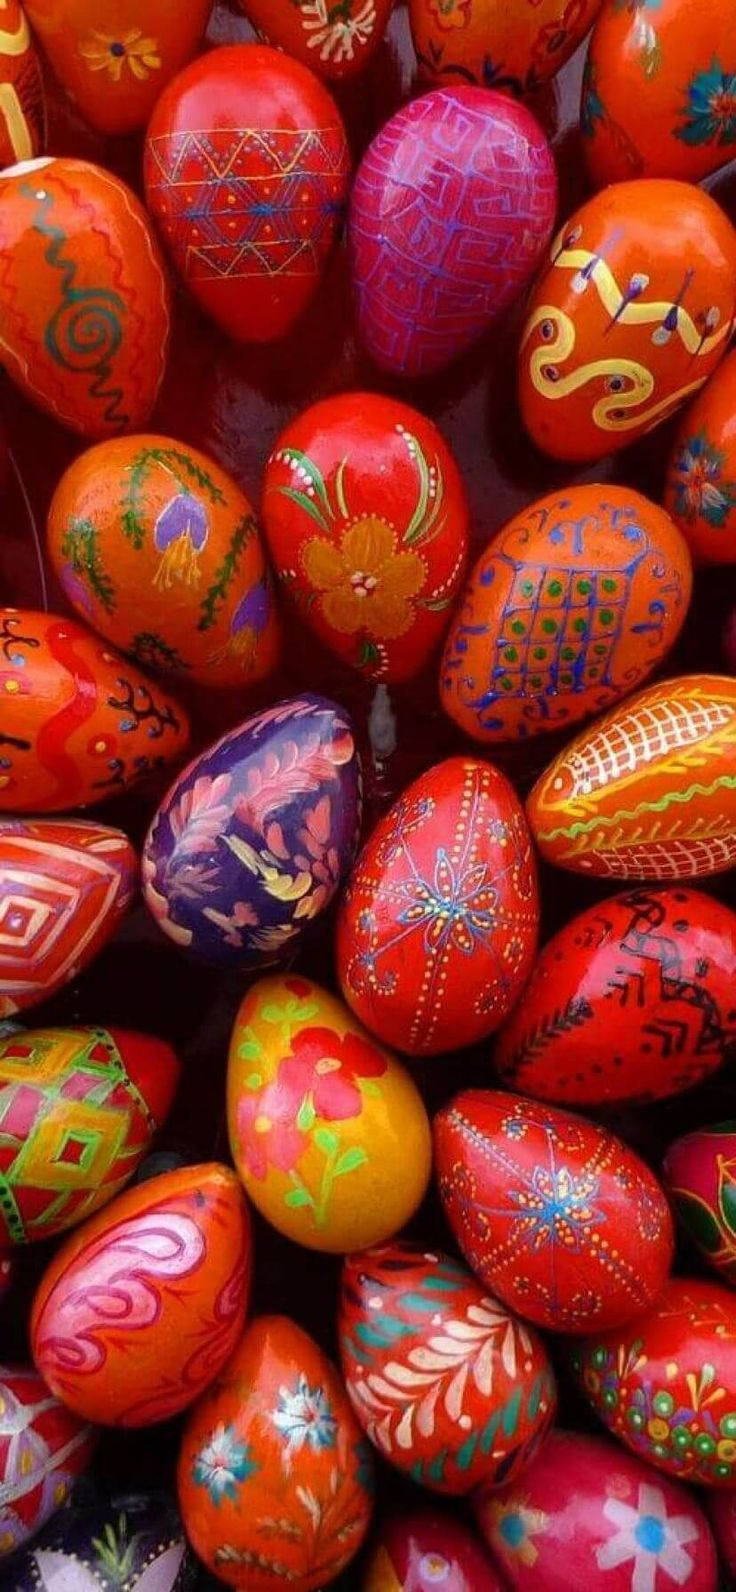 Celebrate Easter with a brand new smartphone Wallpaper